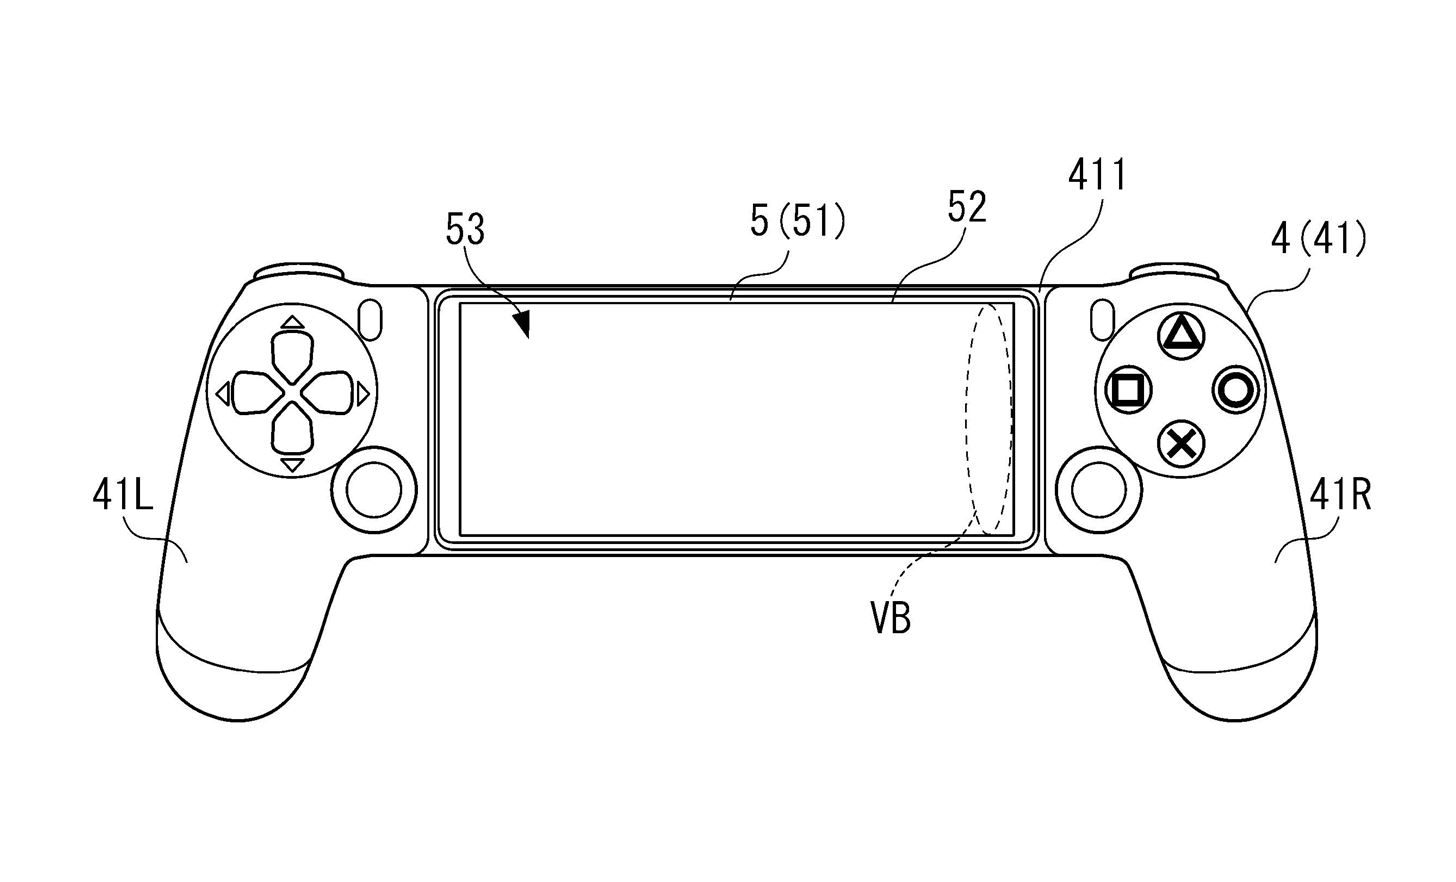 Sony Might Be Working on a DualShock Controller with Built-in Phone Dock for Dedicated Mobile Gaming